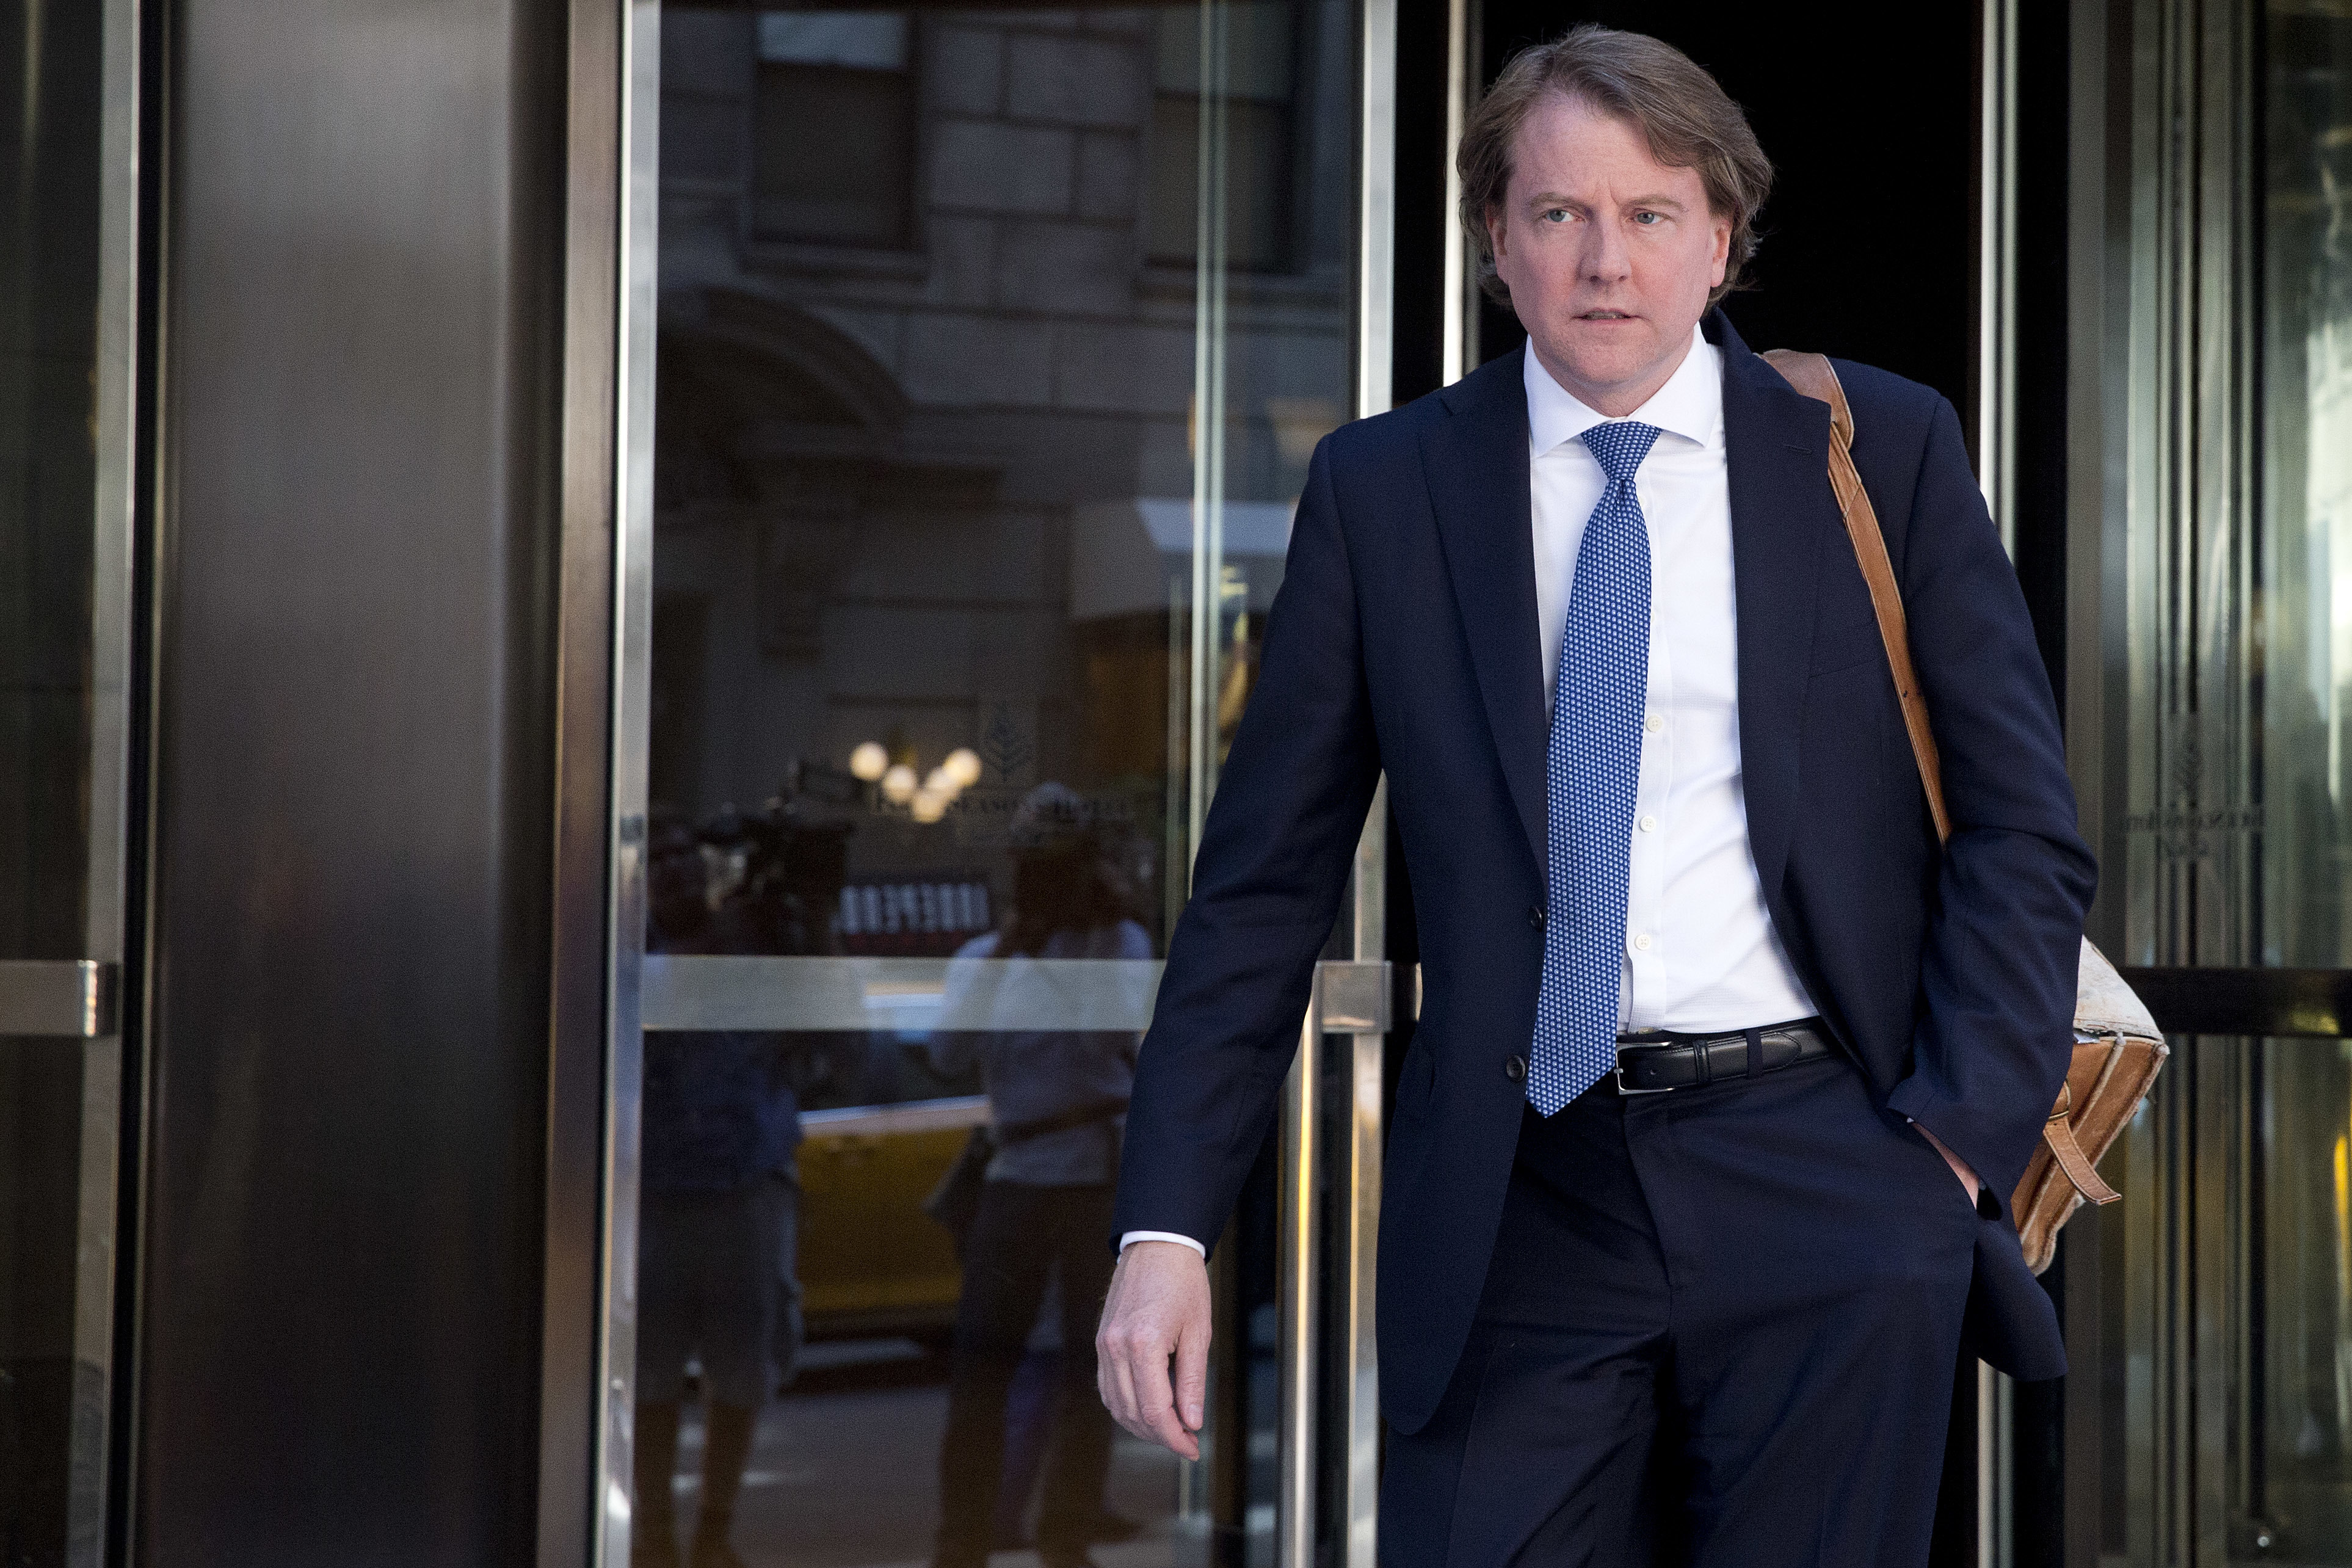 Attorney Donald McGahn leaves the Four Seasons hotel in New York, Thursday, June 9, 2016, after a GOP fundraiser. (Mary Altaffer—AP)